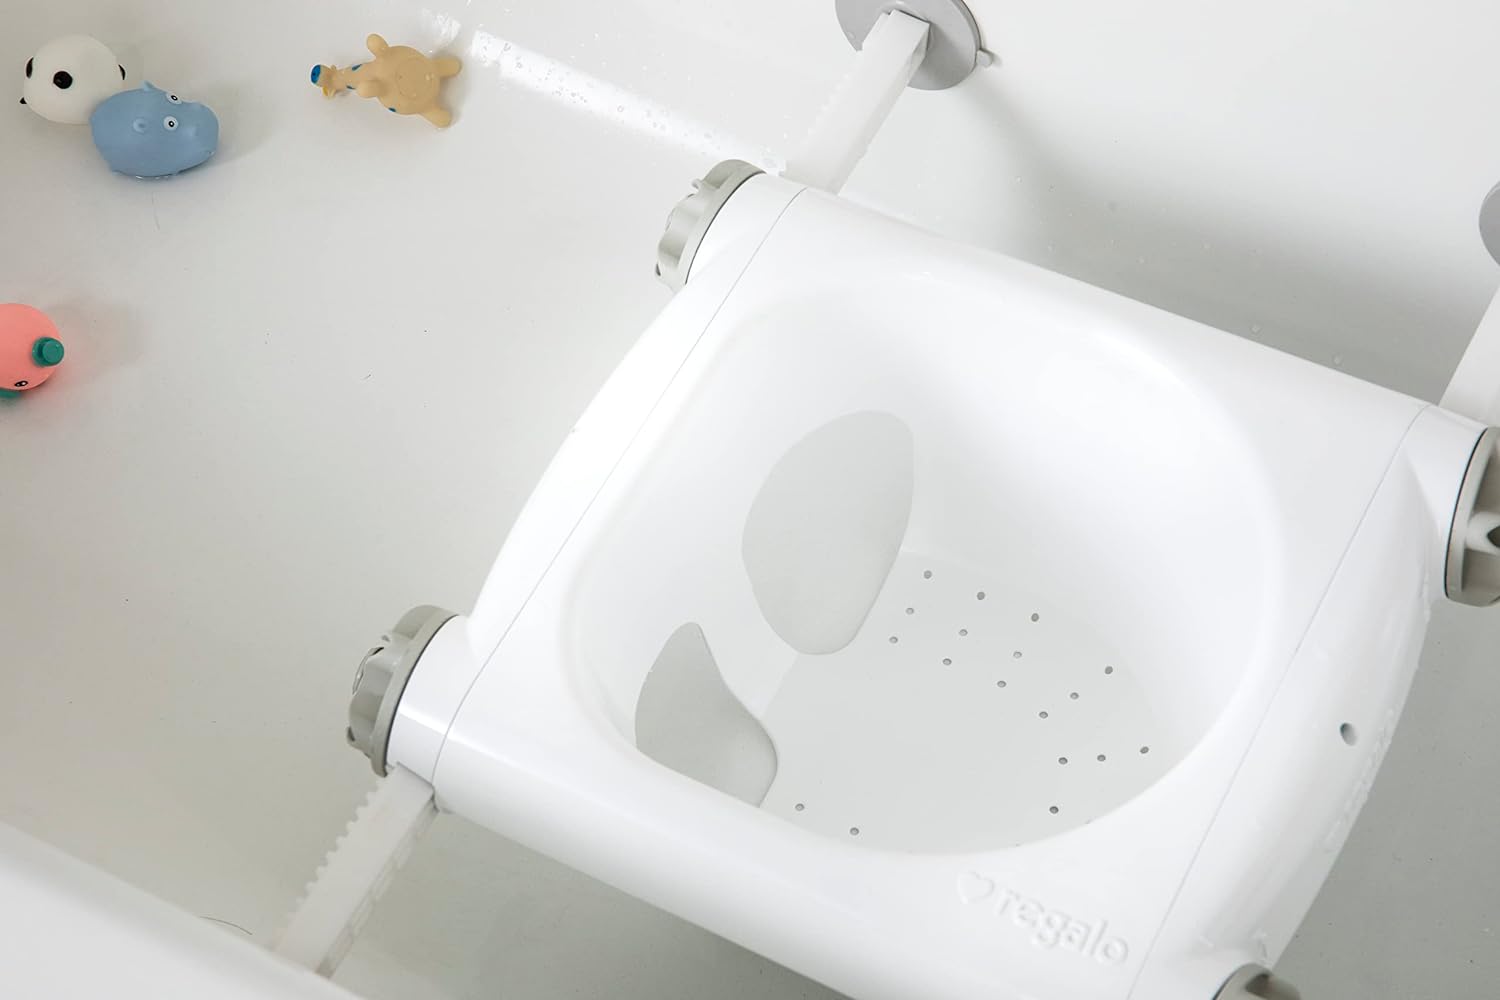 Bath seat with extended arms and non-slip grippers